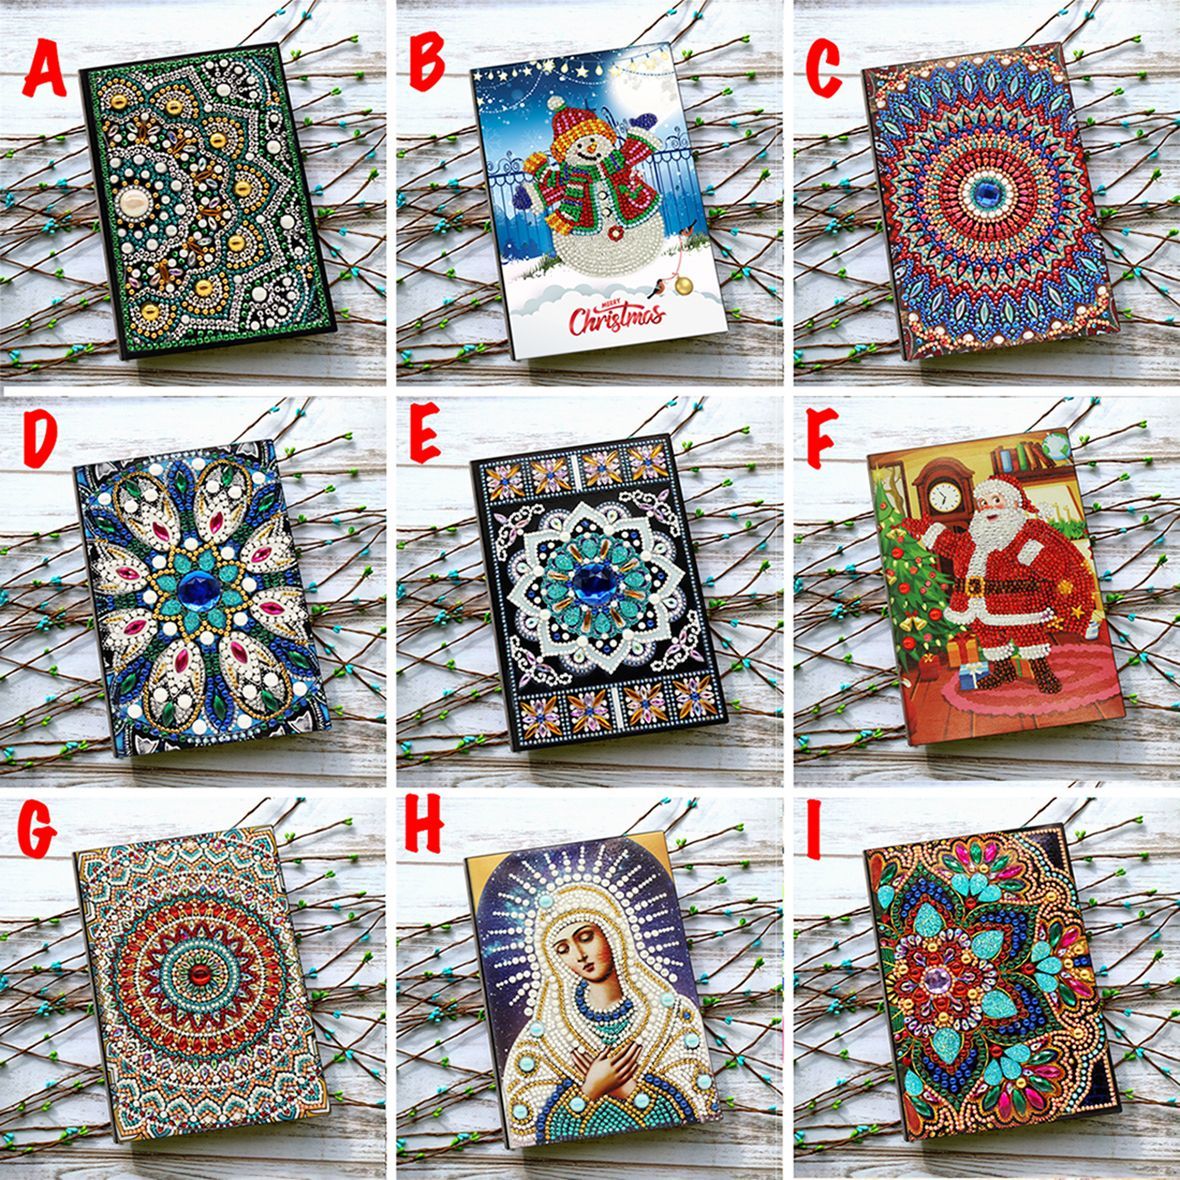 DIY-Diamond-Painting-Special-Shape-Diary-Book-Diamond-Decorations-A5-Notebook-Embroidery-kits-1561135